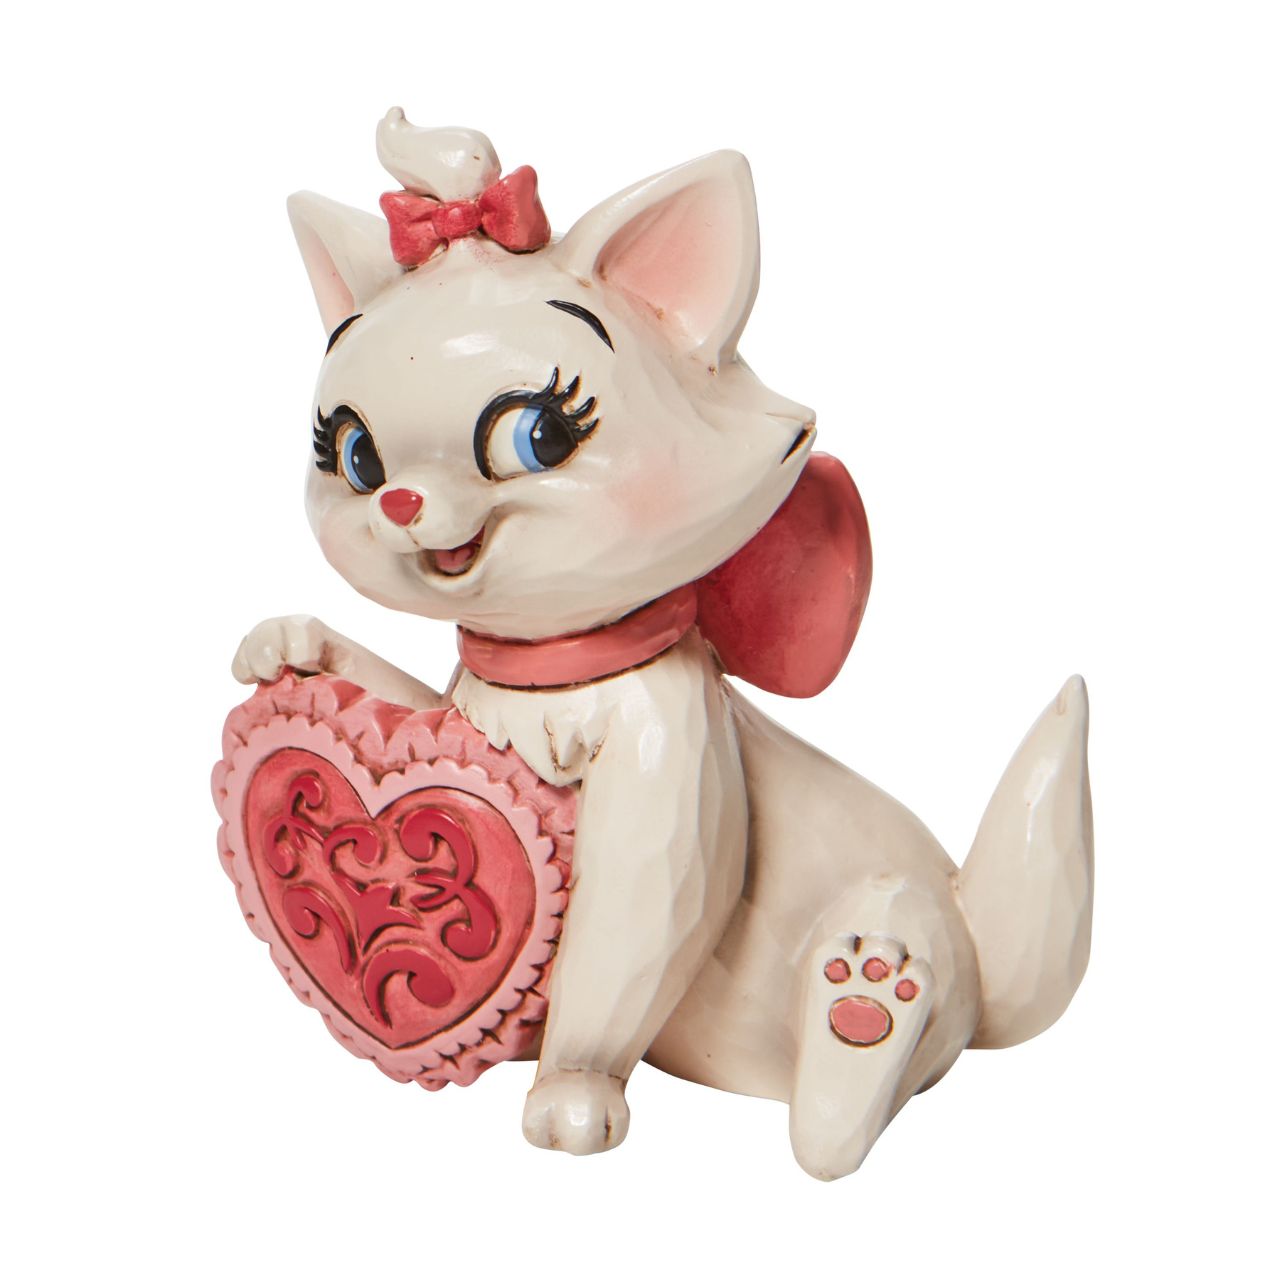 Jim Shore The Aristocats Marie Heart Mini Figurine  The 1970 Walt Disney classic, The Aristocats, followed three kittens and their mother across the Parisian countryside after being cat-napped from their home. Marie, the only daughter of the bunch, holds a pink heart in this sweet Jim Shore figurine. Packaged in a branded gift box.